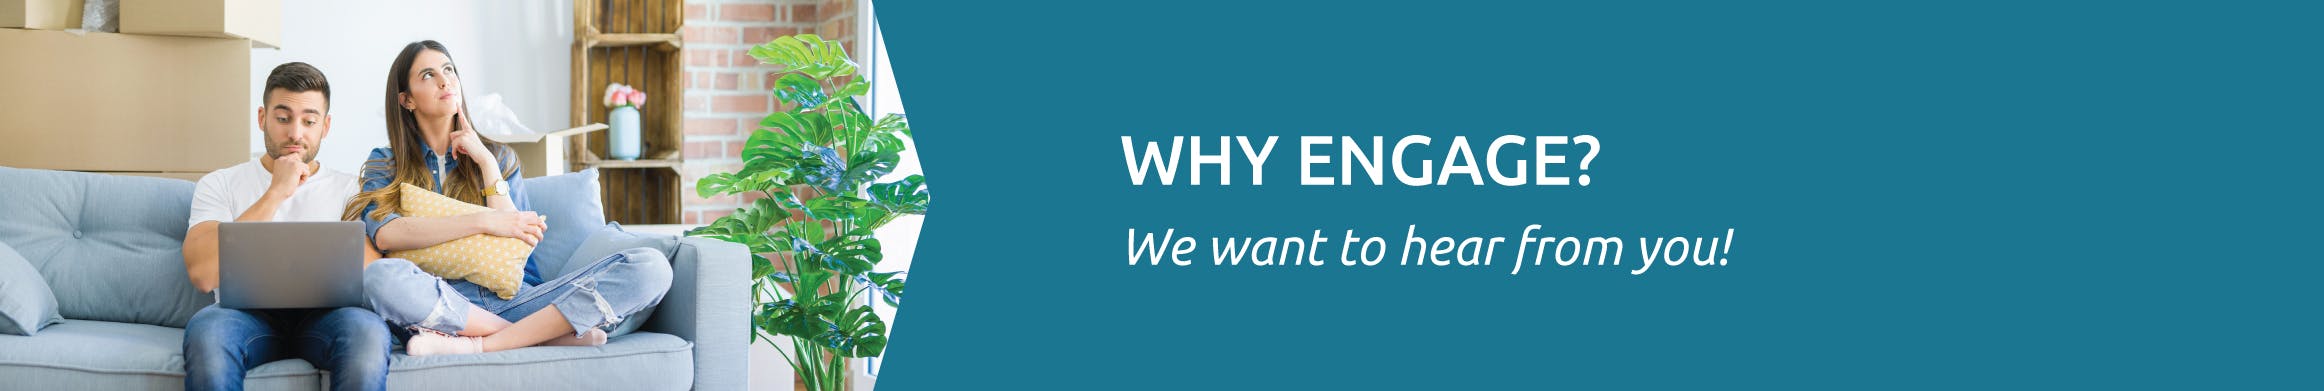 Why engage?